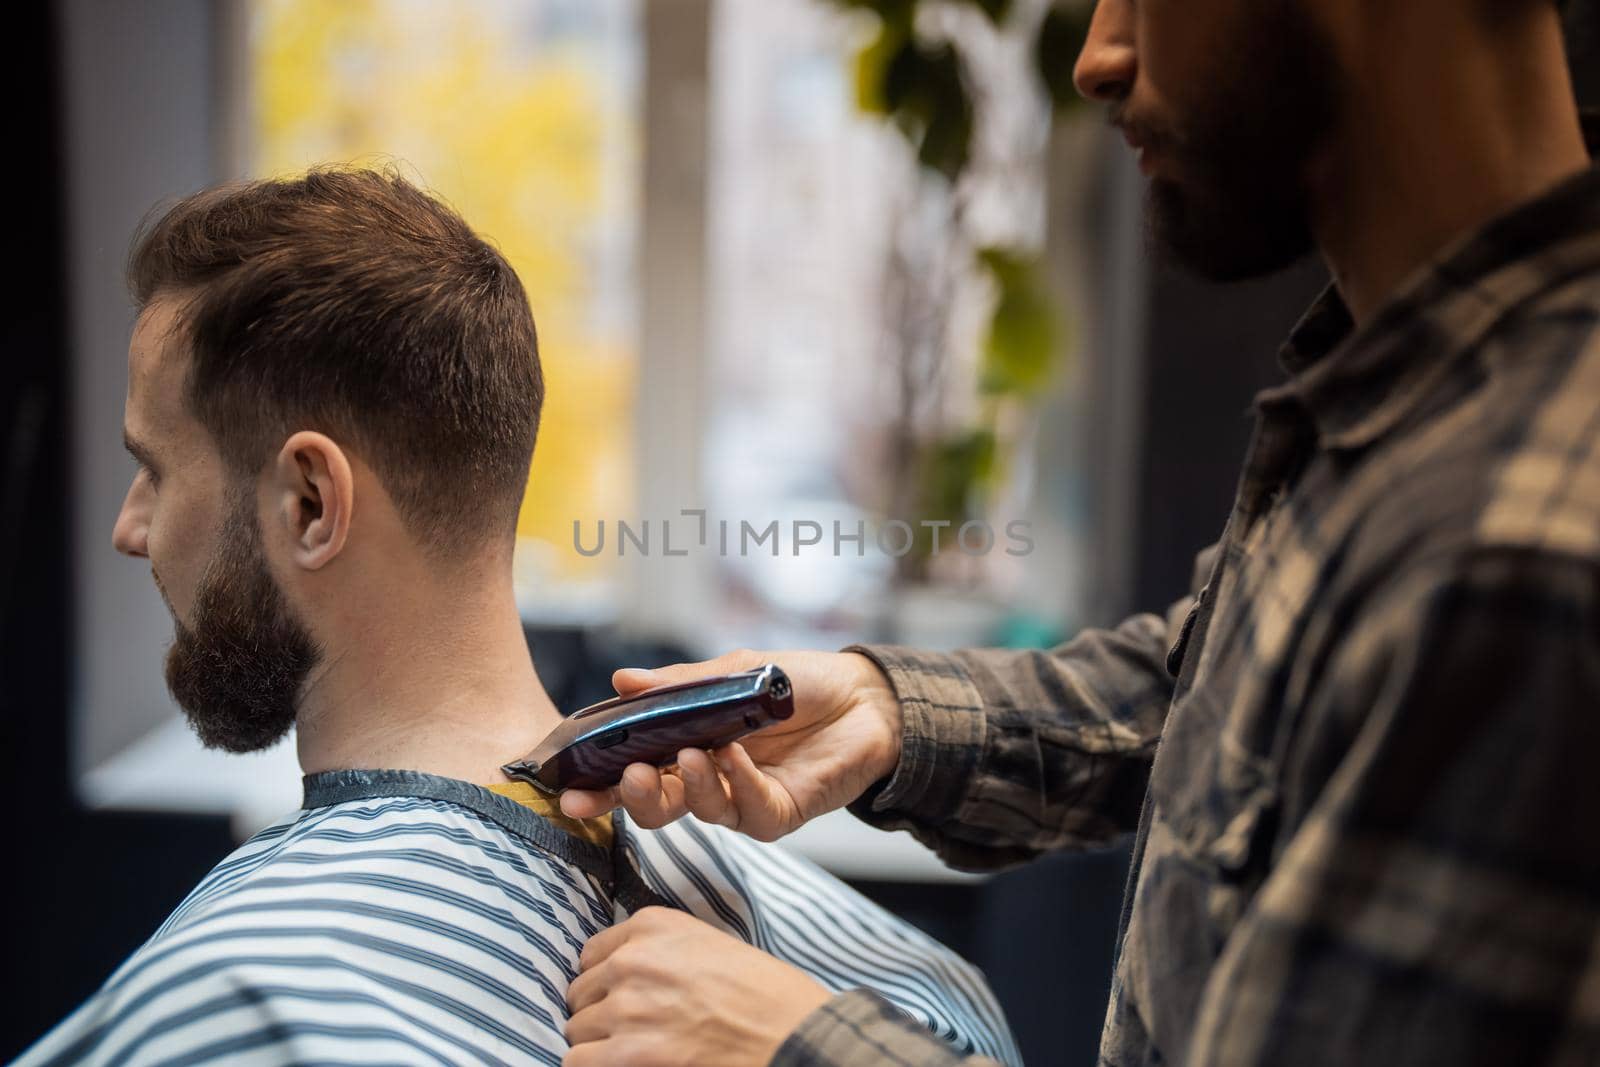 Master in barbershop makes men's haircutting with hair clipper by teksomolika